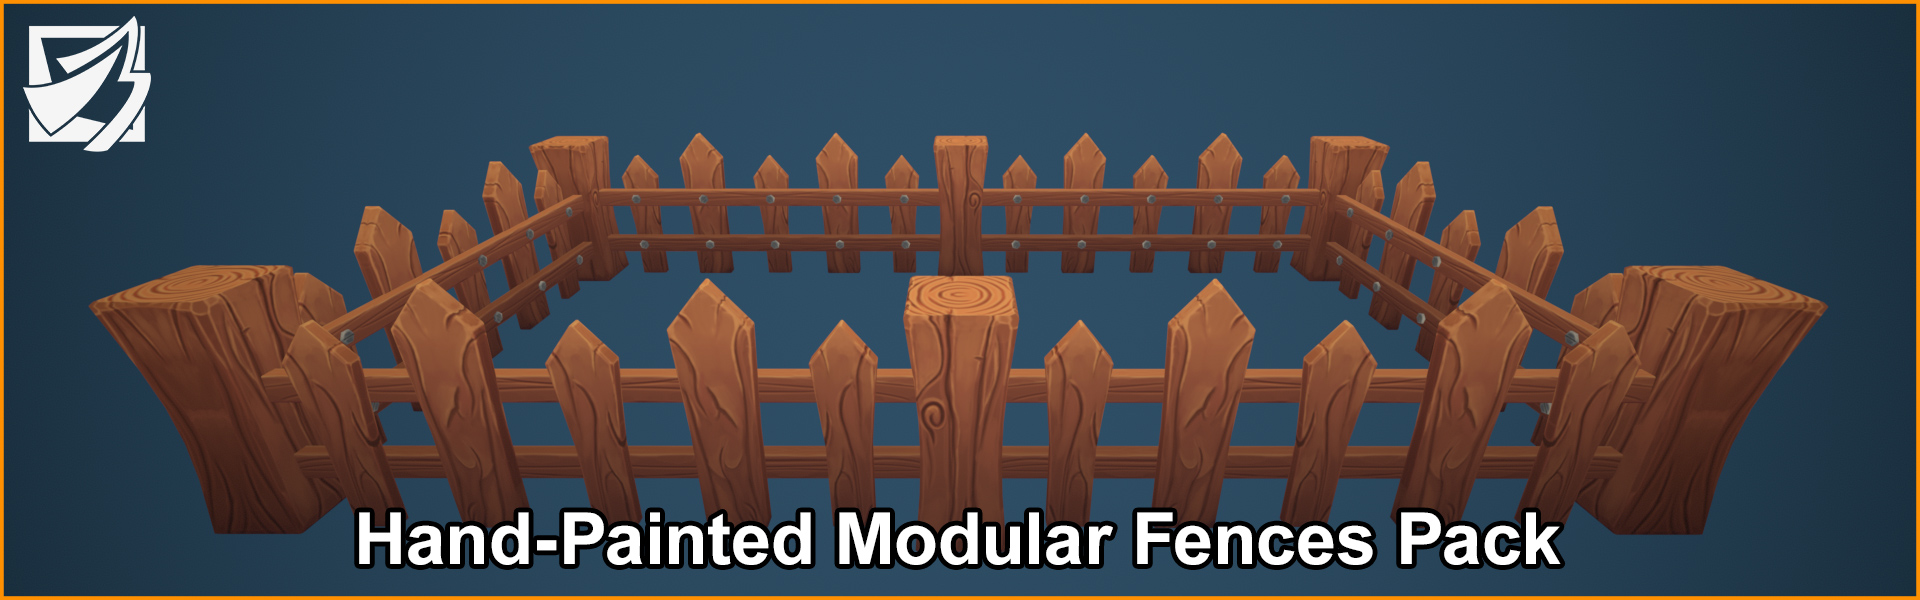 Hand-Painted Modular Fences Pack